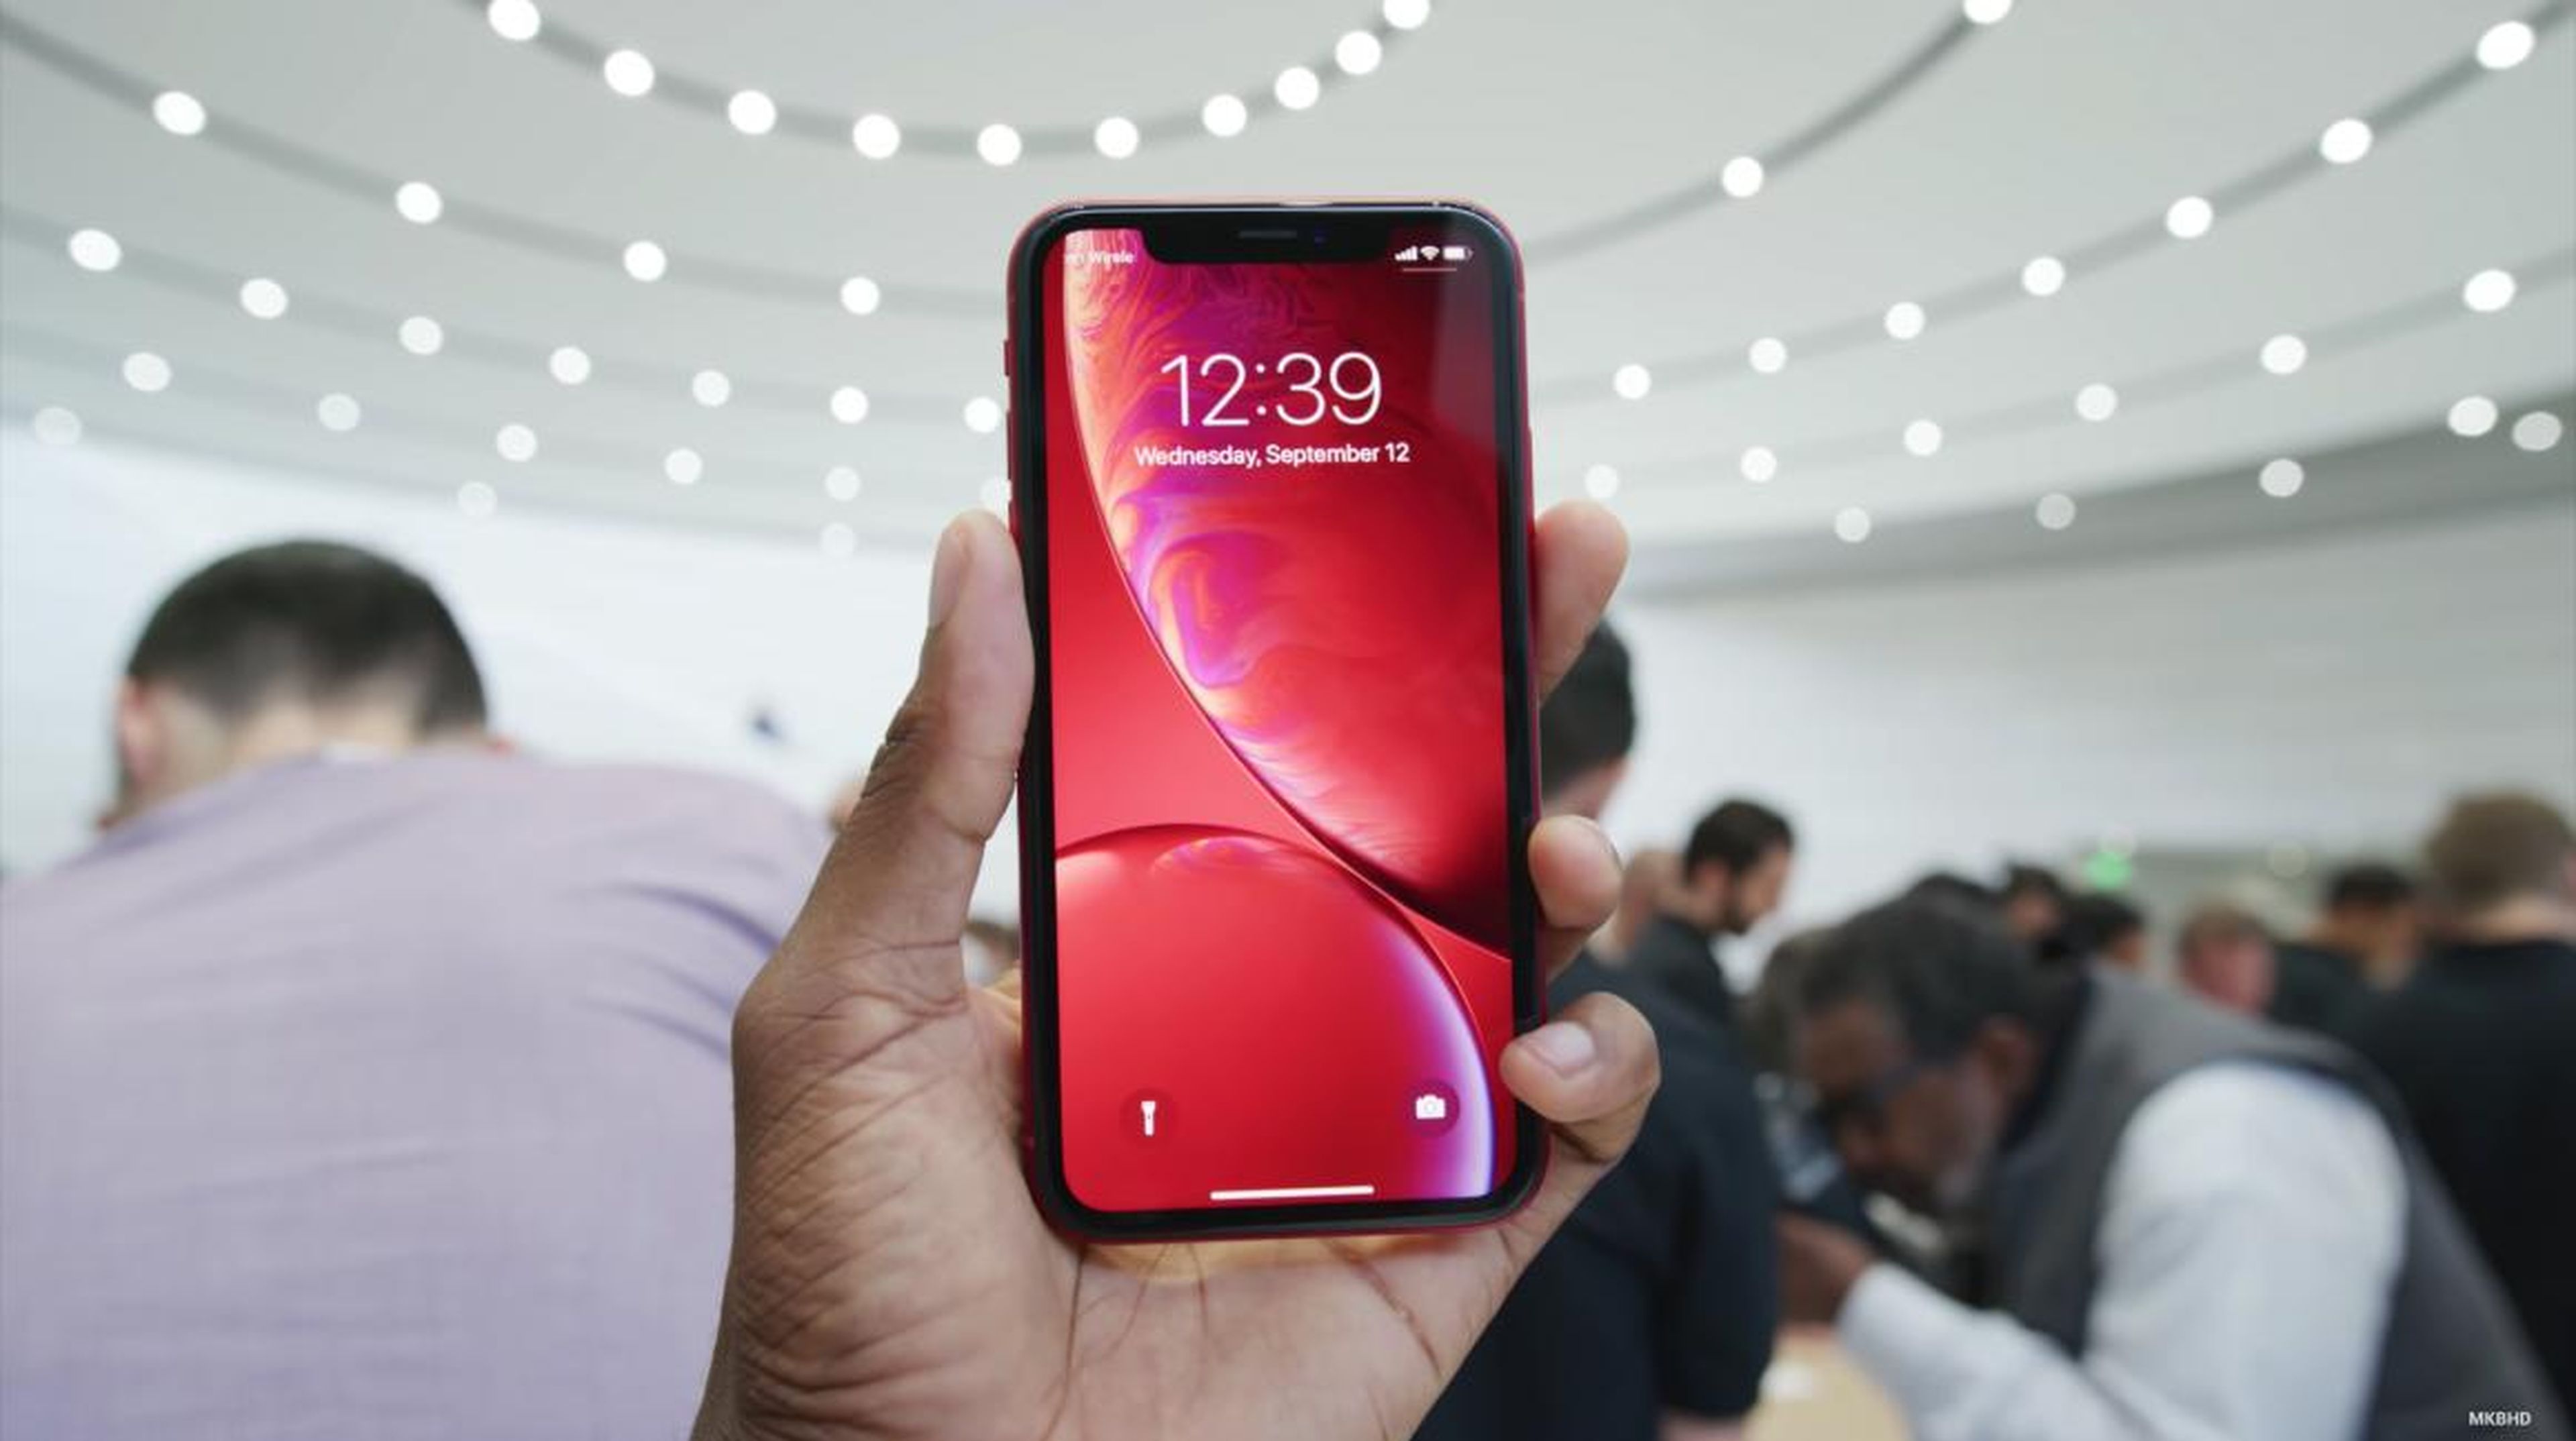 Finally, Apple made a red iPhone XR. Here it is from the front.